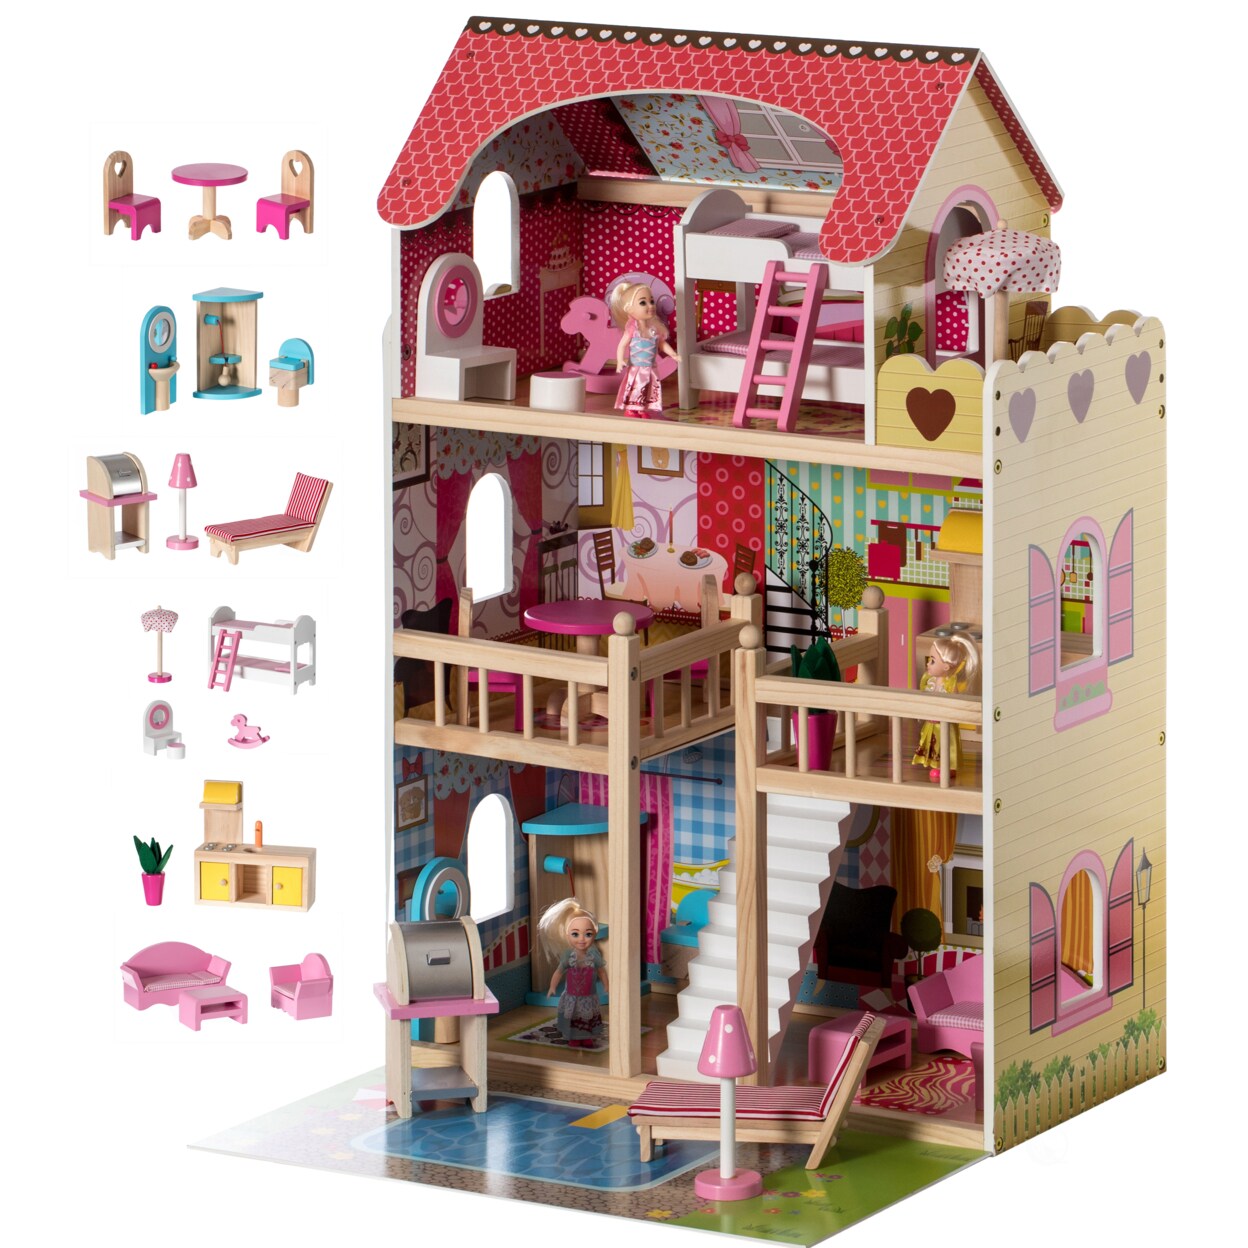 Gardenised Wooden Doll House with Toys and Furniture Accessories with LED light for Ages 3+